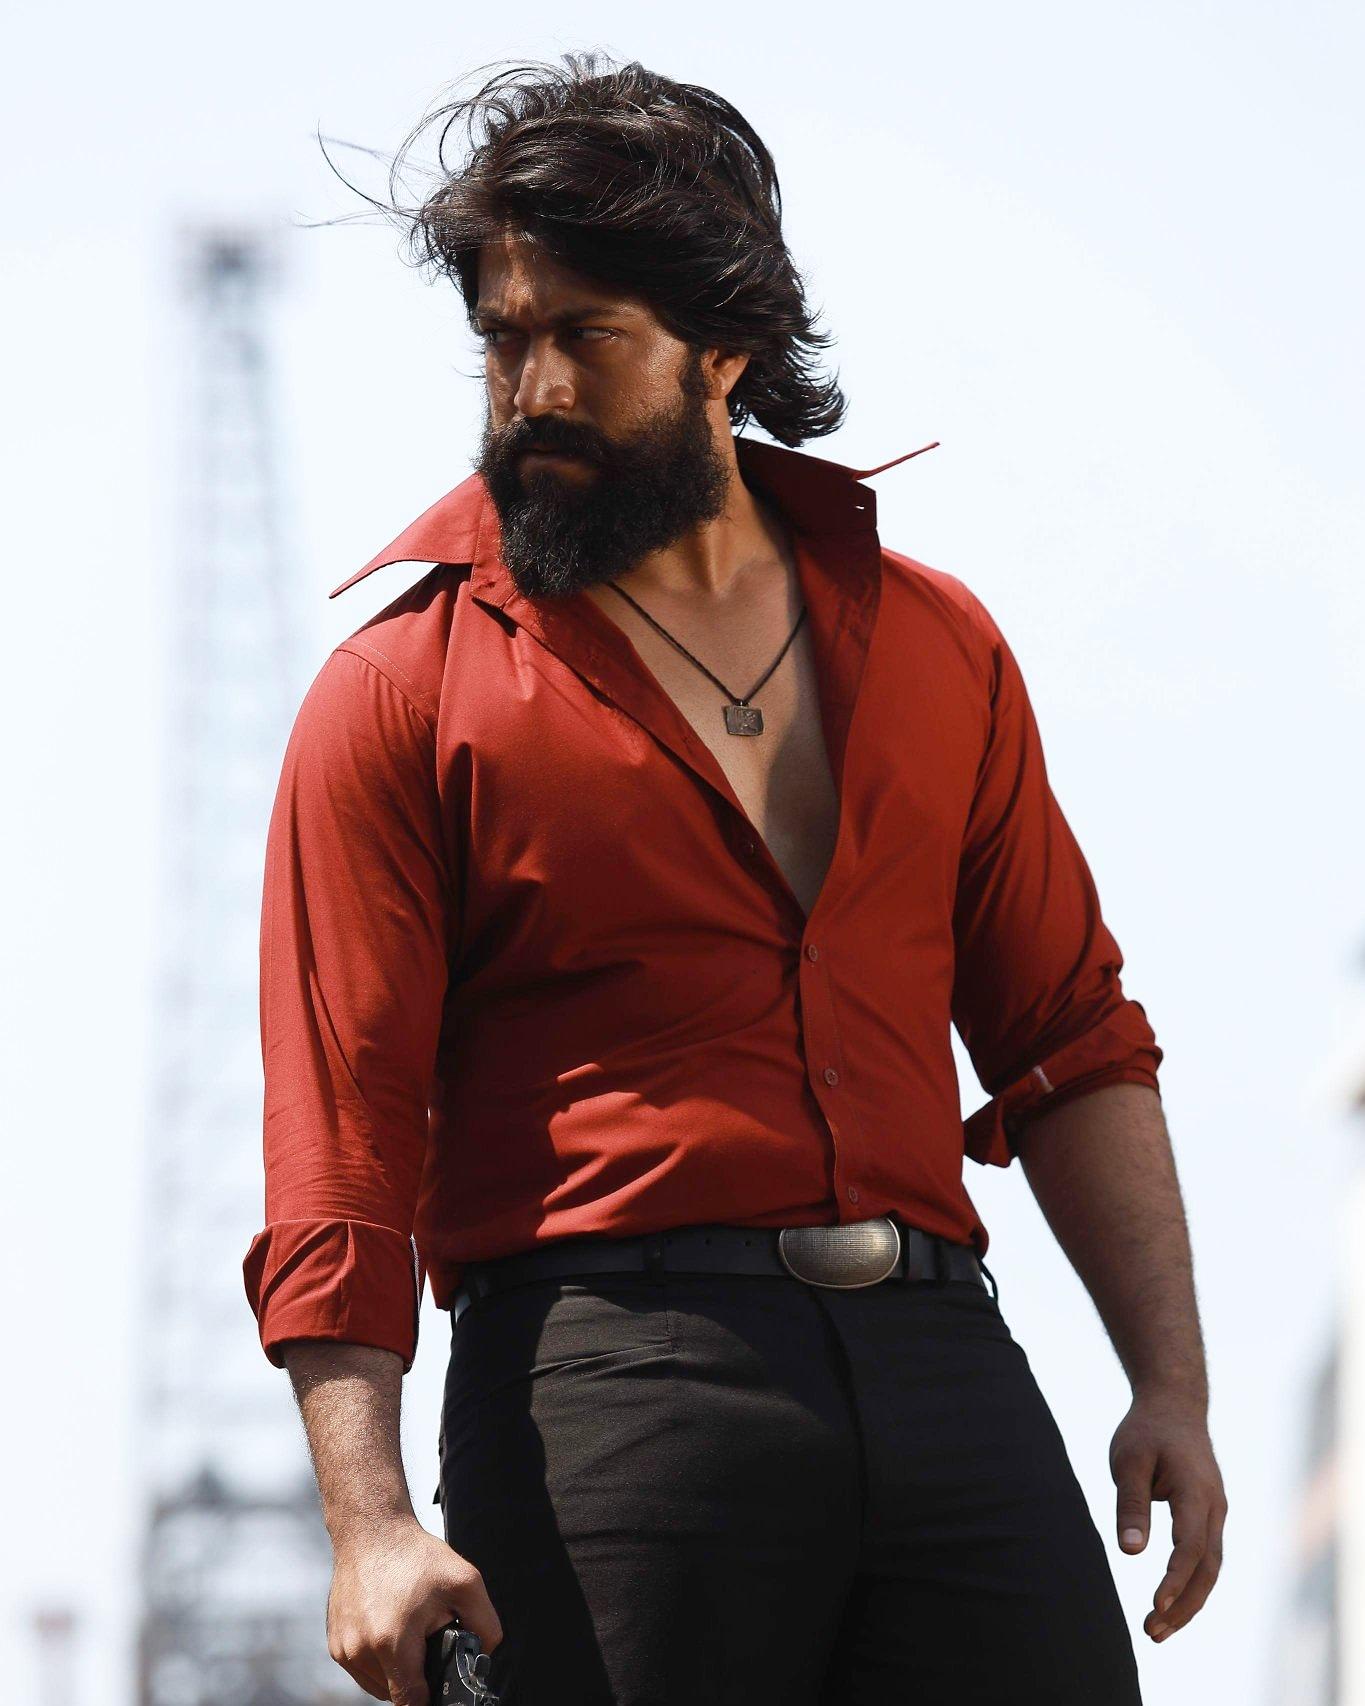 Rocky Bhai 4K Wallpaper / Yash 4k Wallpaper In Kgf - Enjoy and share your favorite beautiful hd